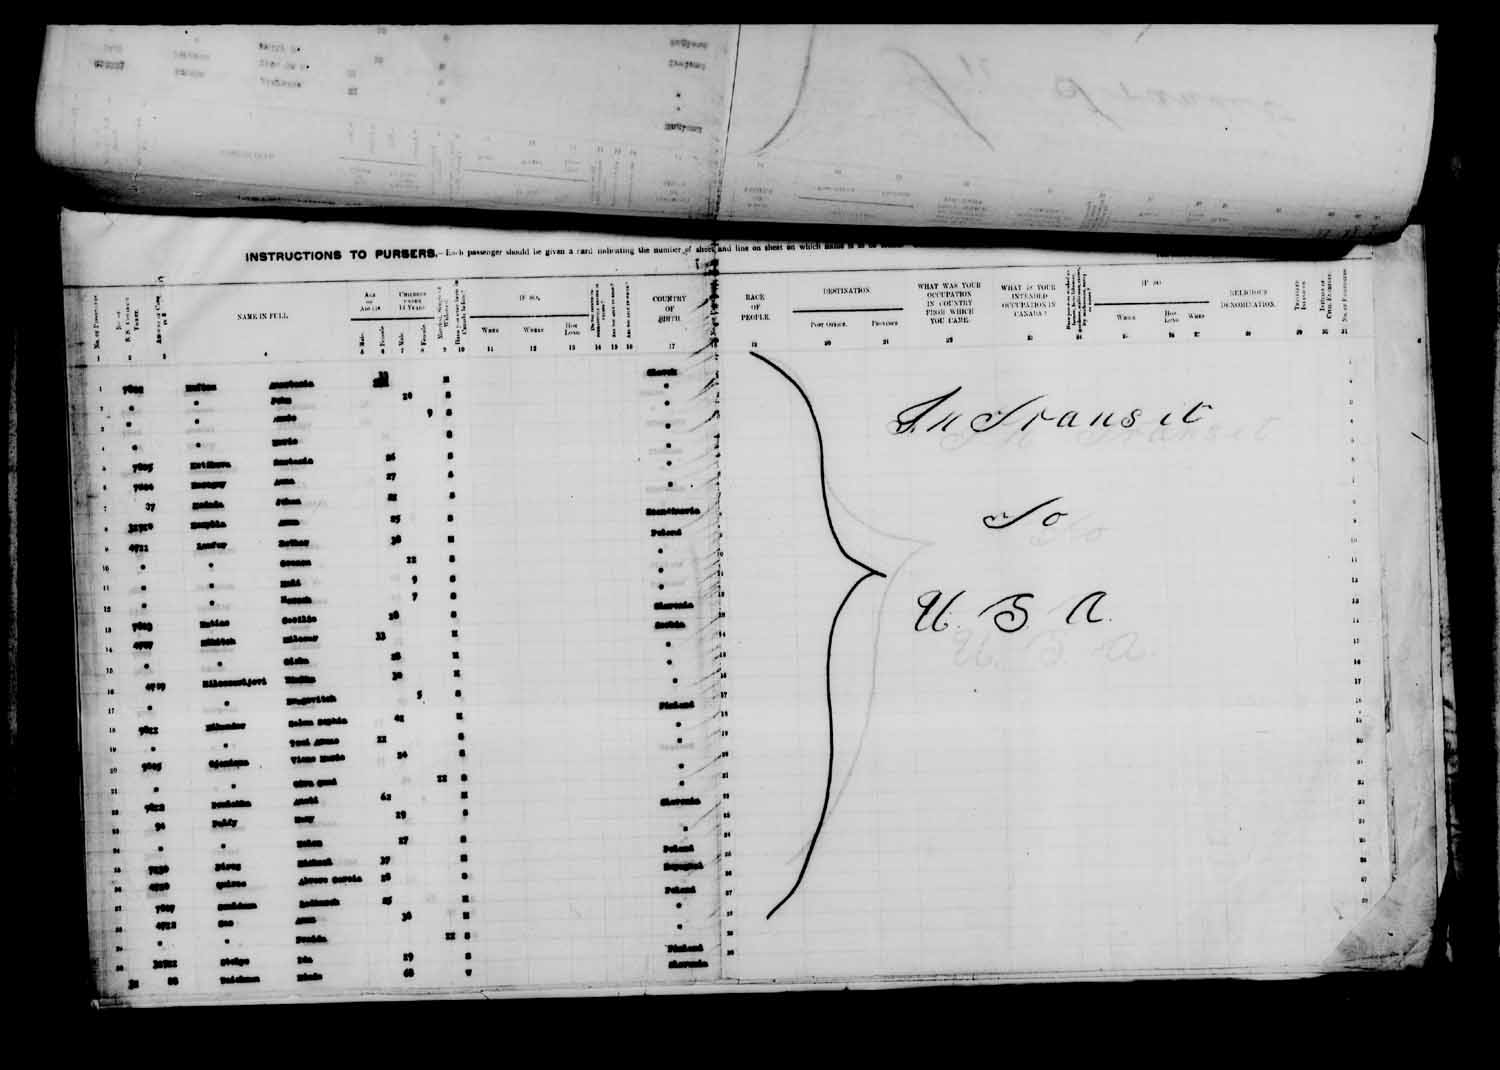 Digitized page of Passenger Lists for Image No.: e003610678